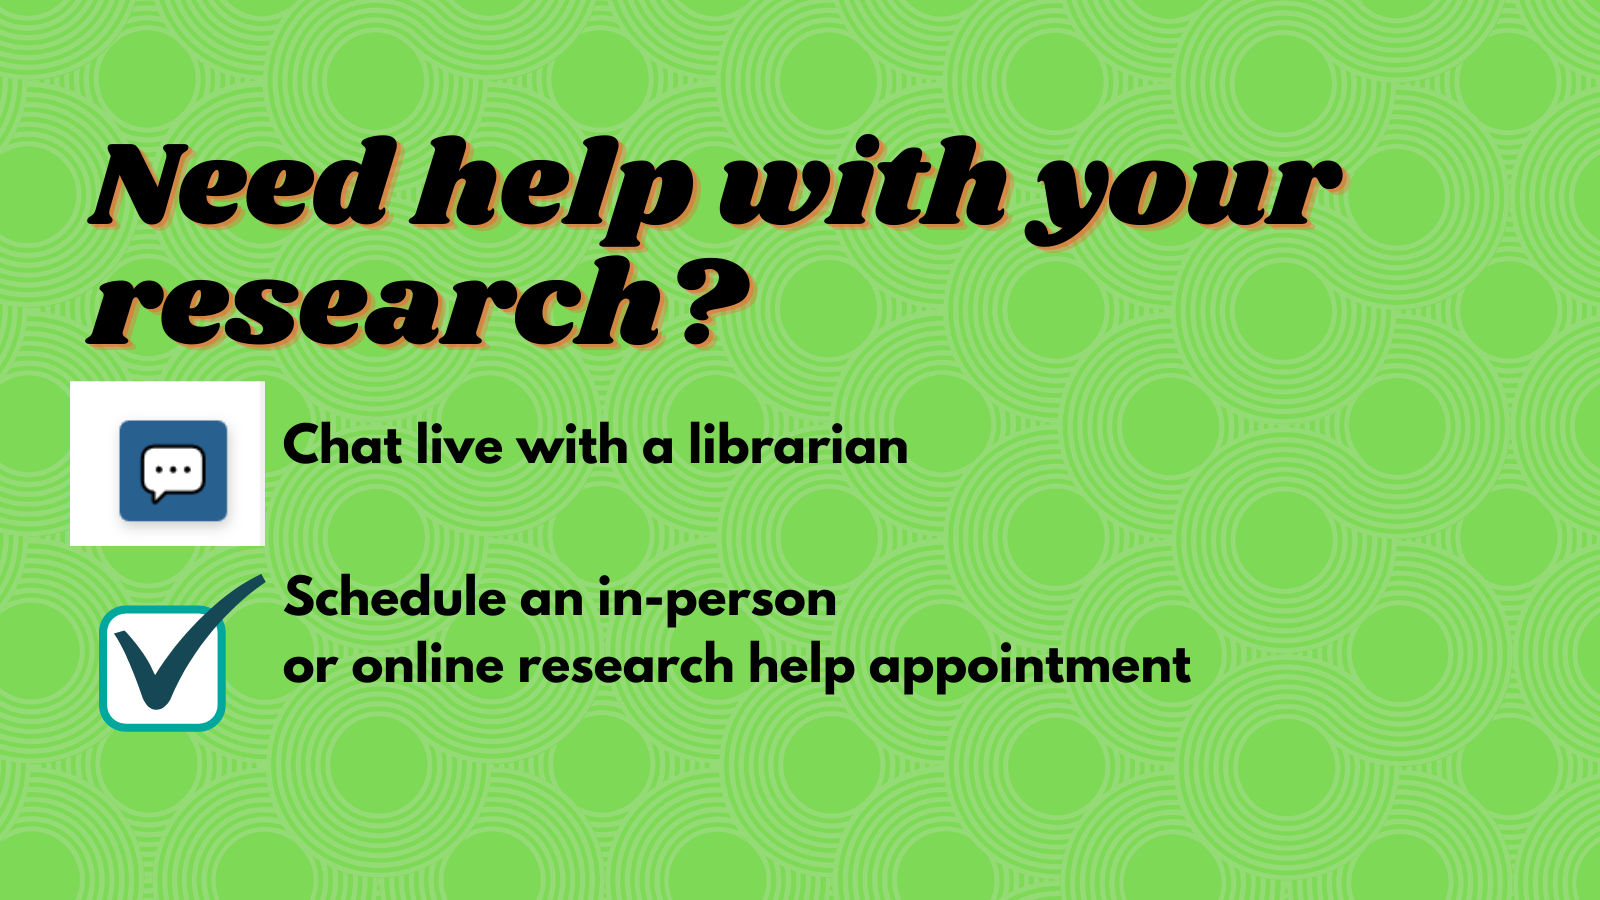 Need help with your research? Chat live with a librarian. Schedule an in-person or online research help appointment.